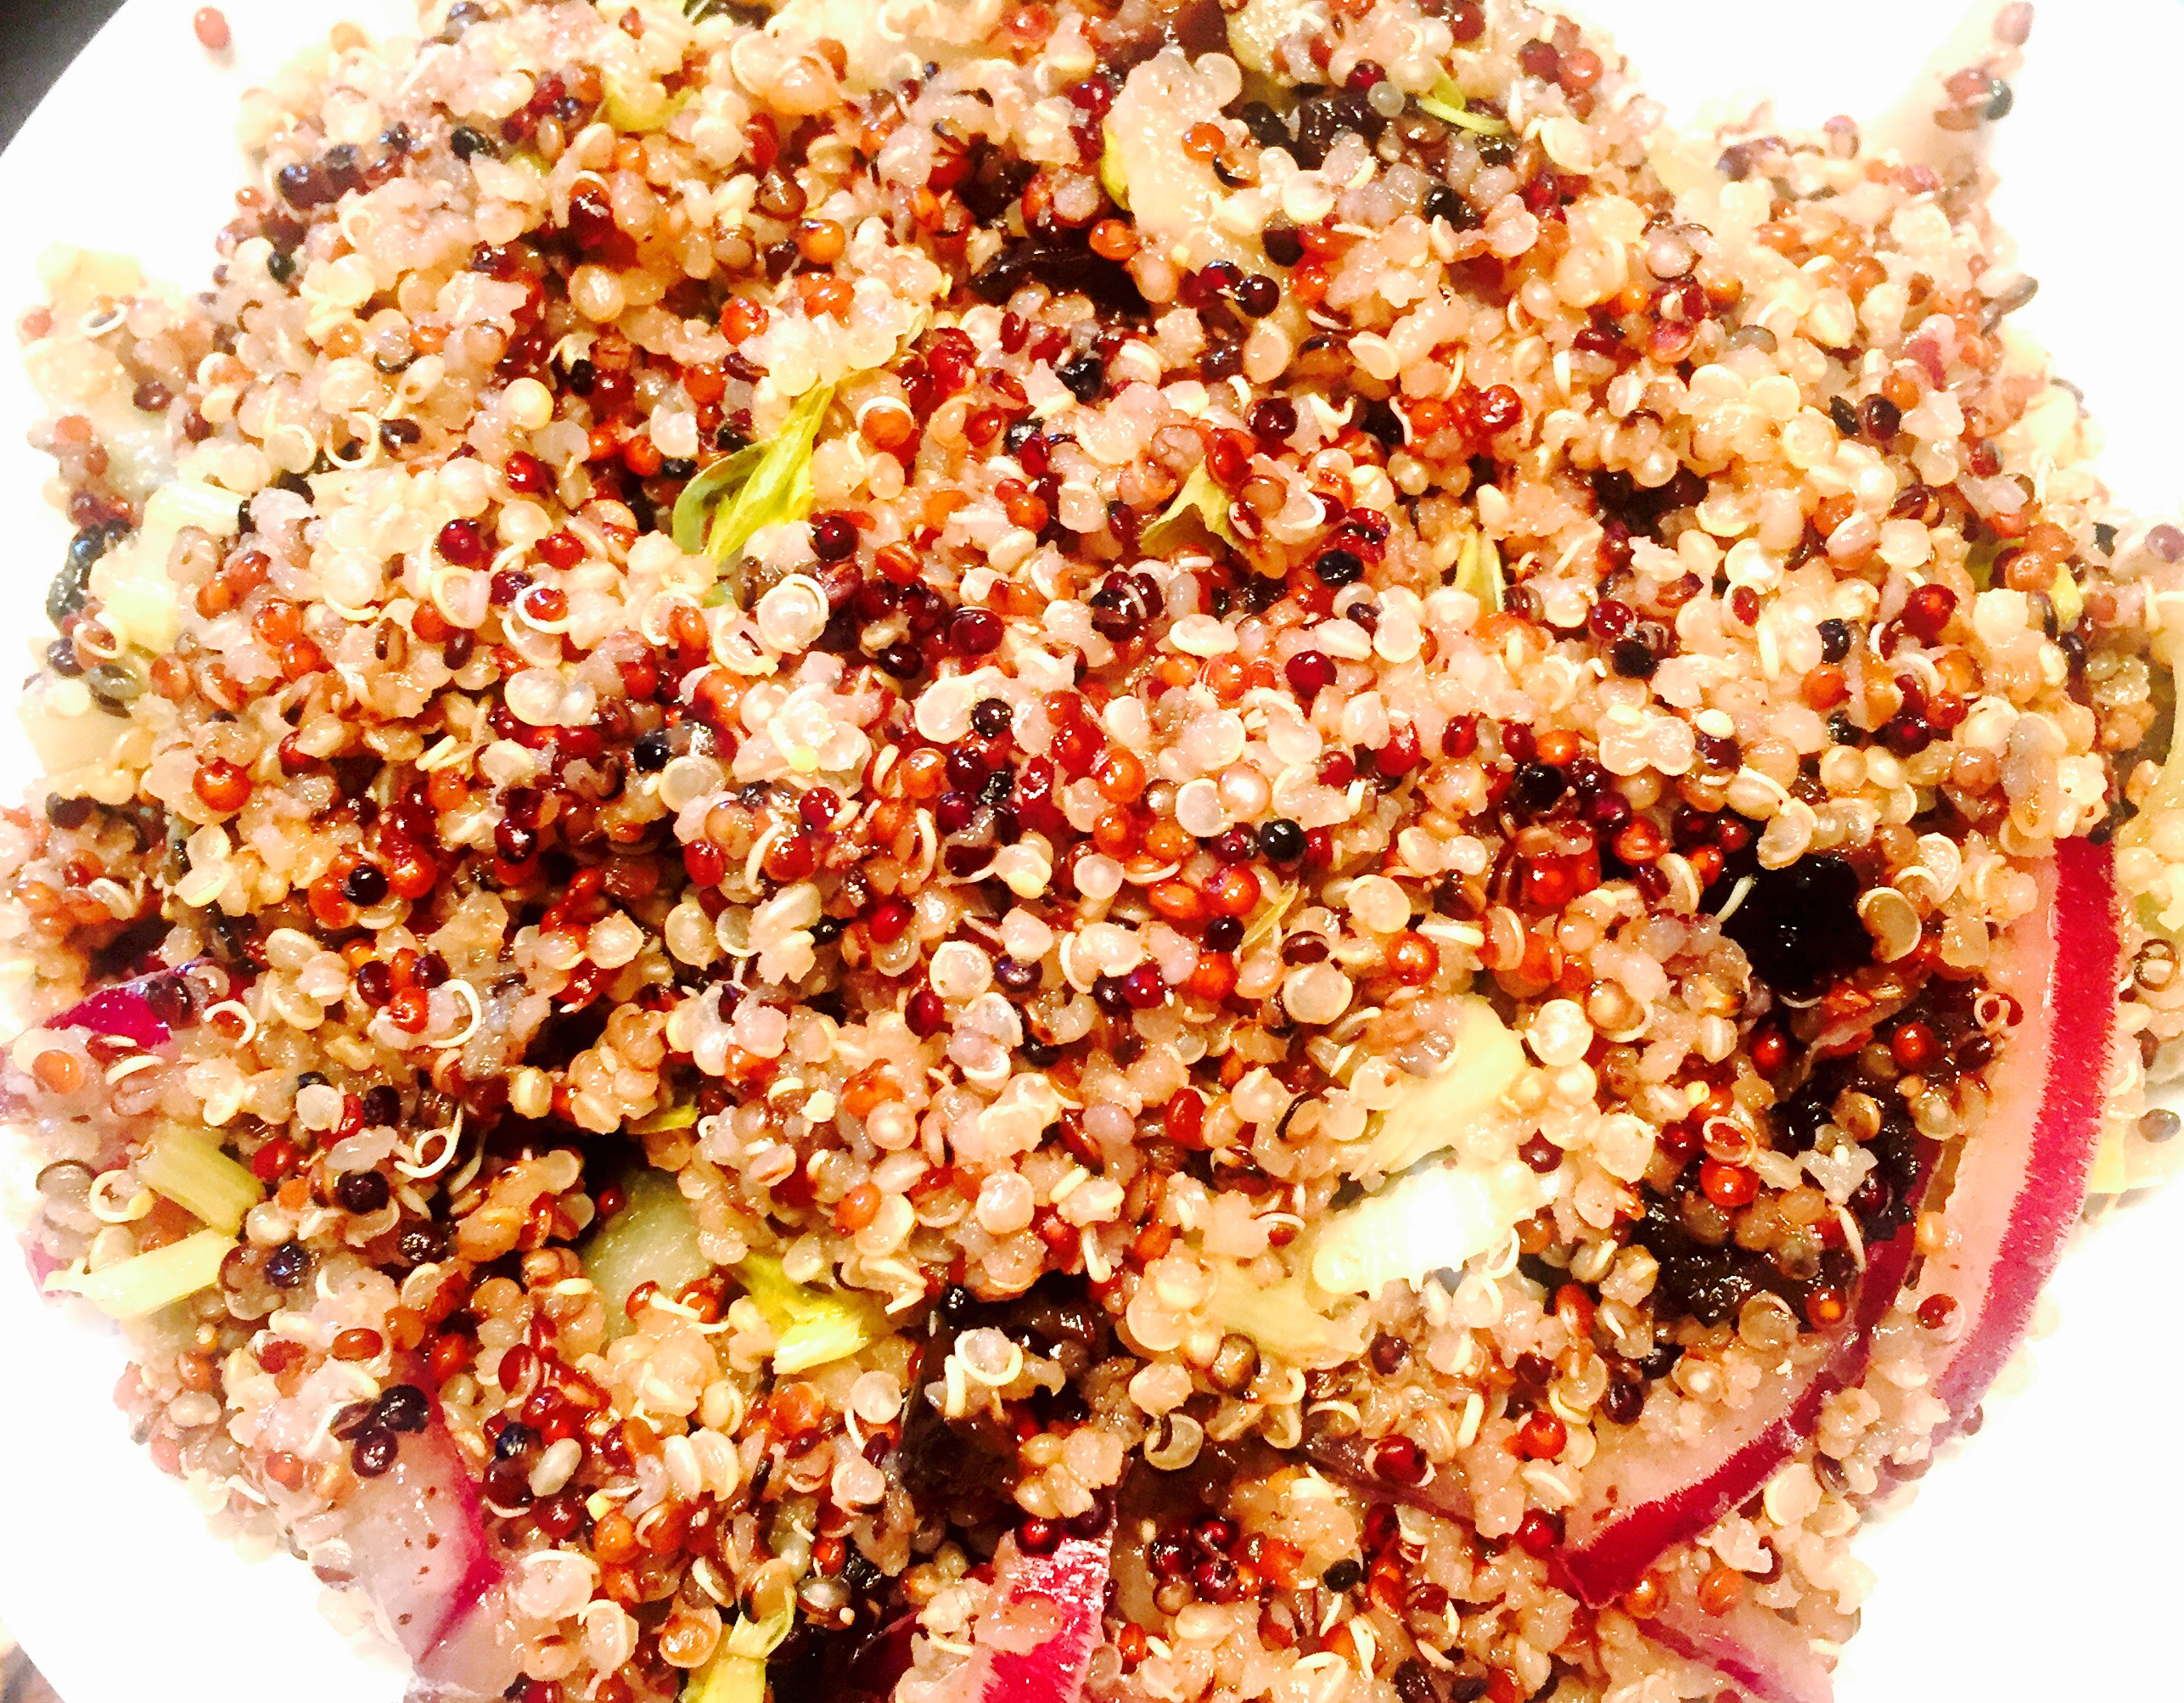 Fresh summer quinoa salad with red onion, black olives and a tangy vinaigrette